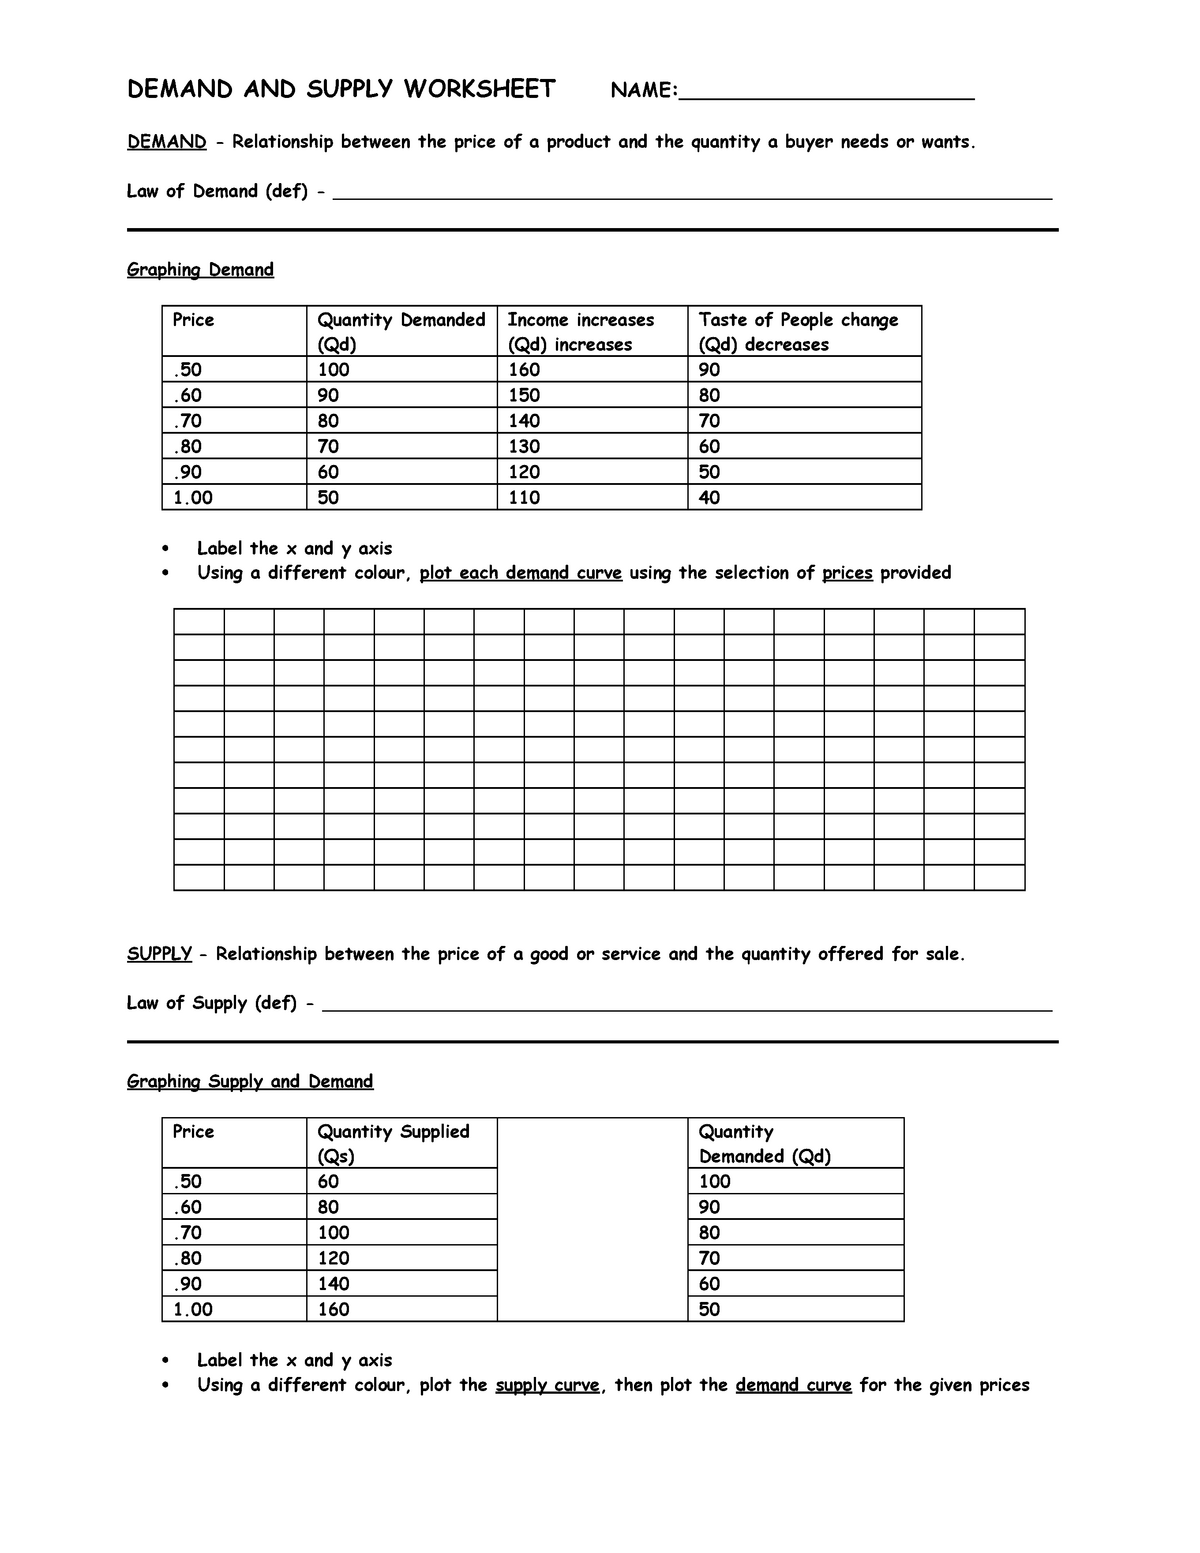 demand-and-supply-practice-worksheet